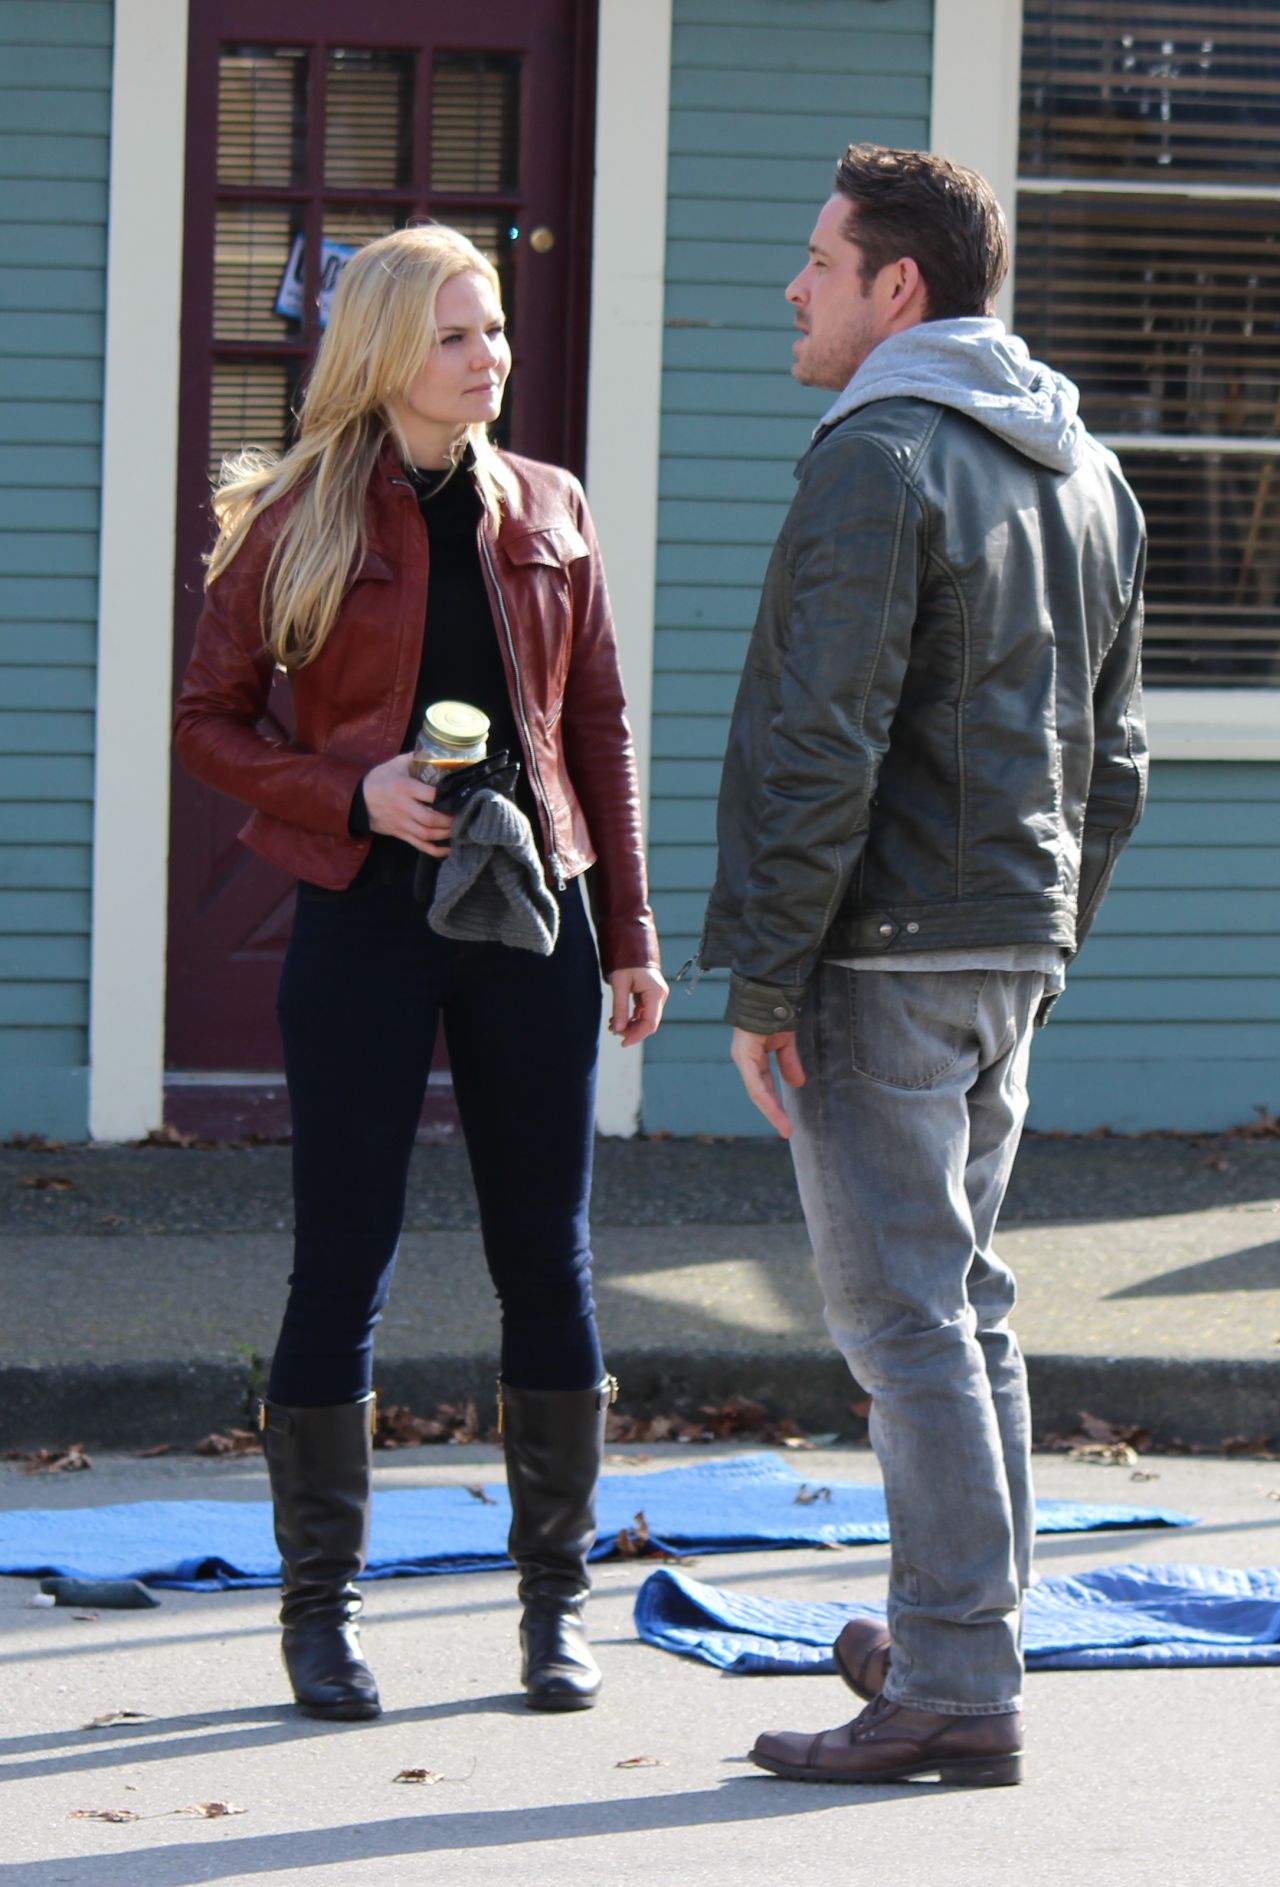 Jennifer Morrison - On the set of Once Upon a Time in Richmond - April 2015